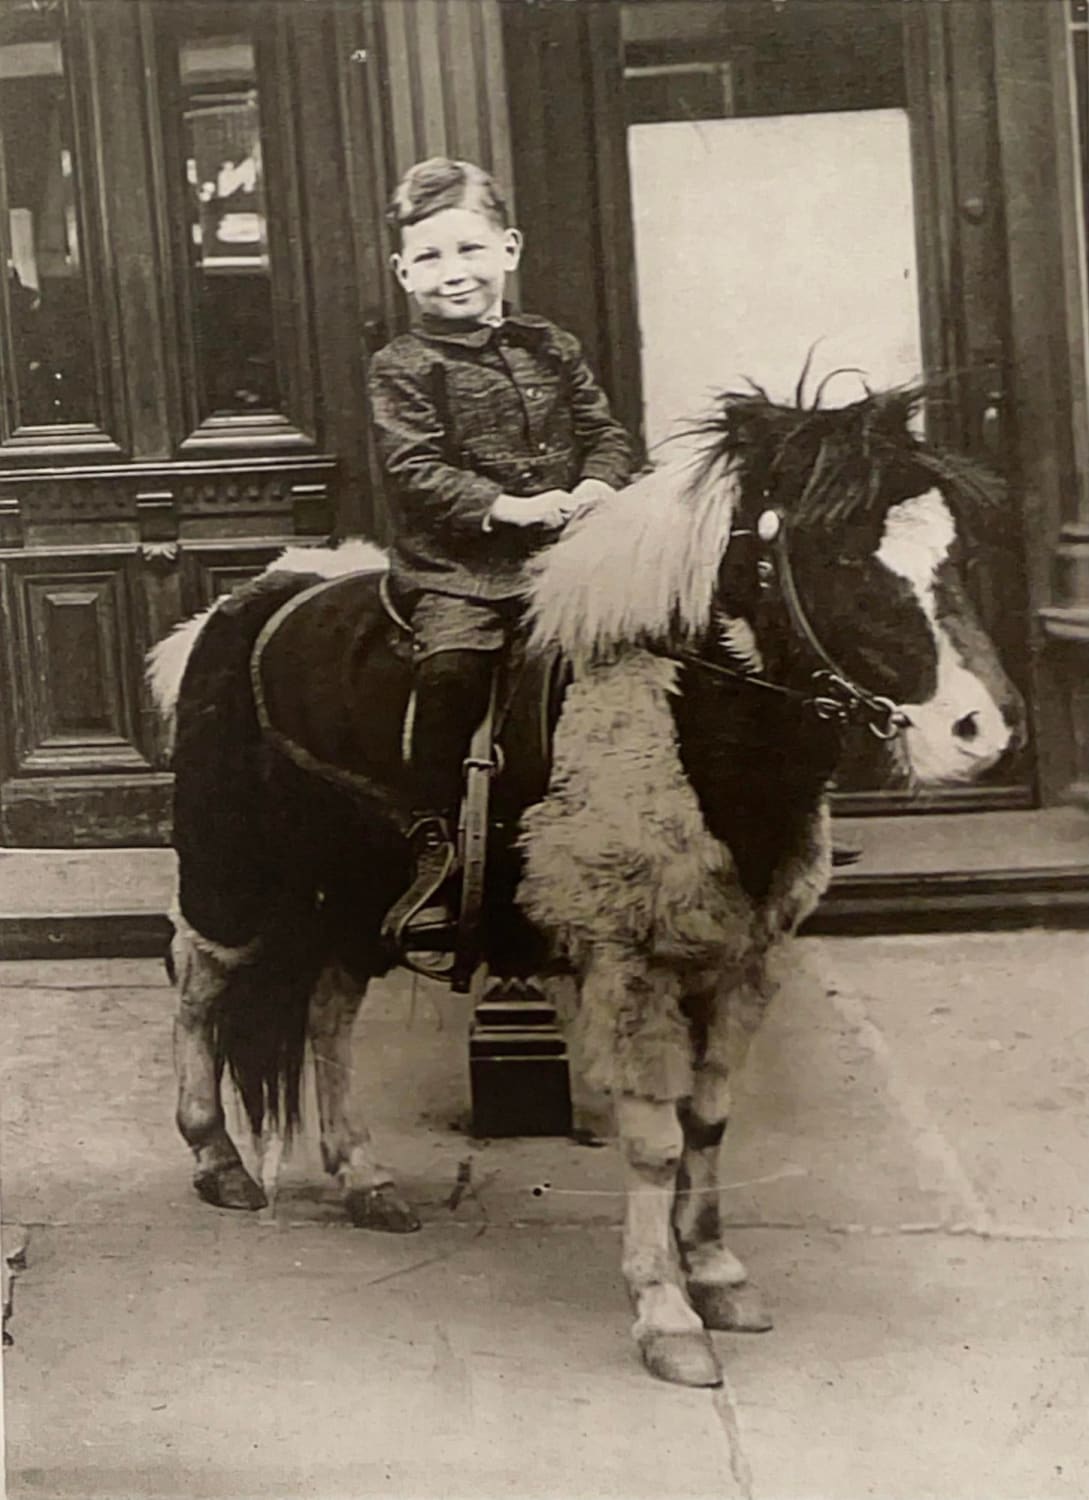 Posing for a picture on a pony, New York City, 1924